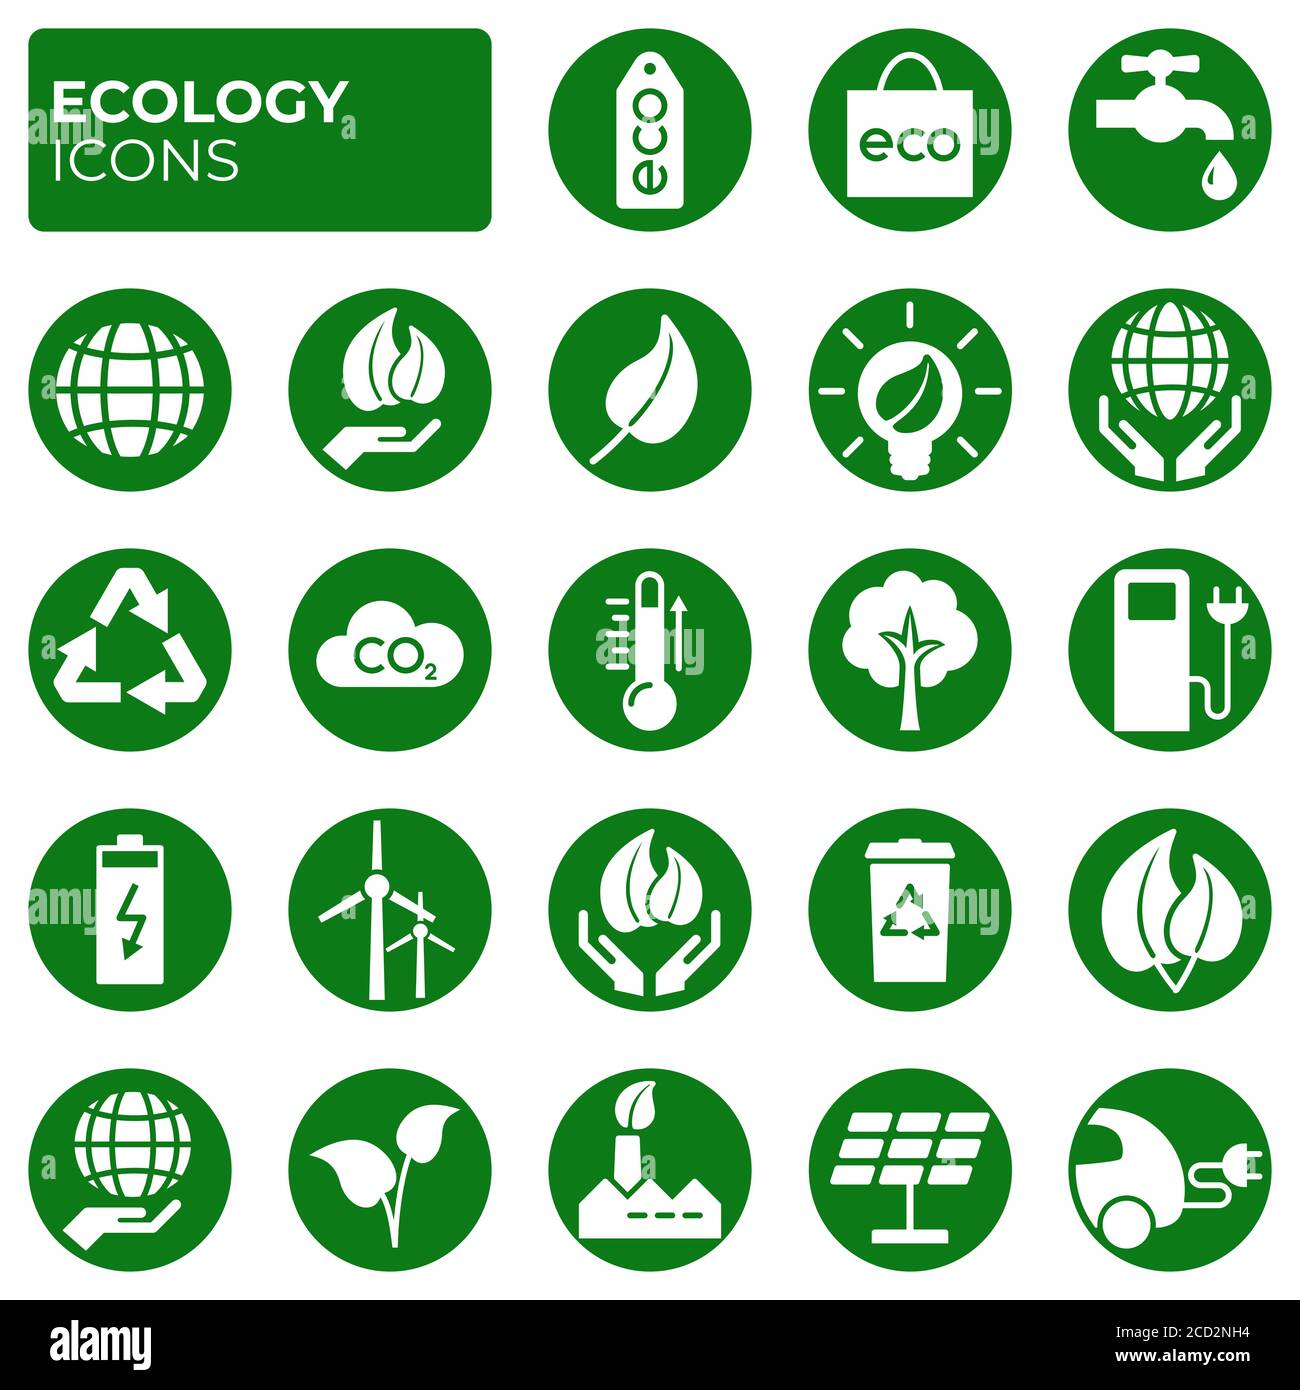 Ecology icons set. Environment protection. Alternative renewable energy. Global warming. Decarbonation. Eco friendly flat linear sign collection Stock Vector